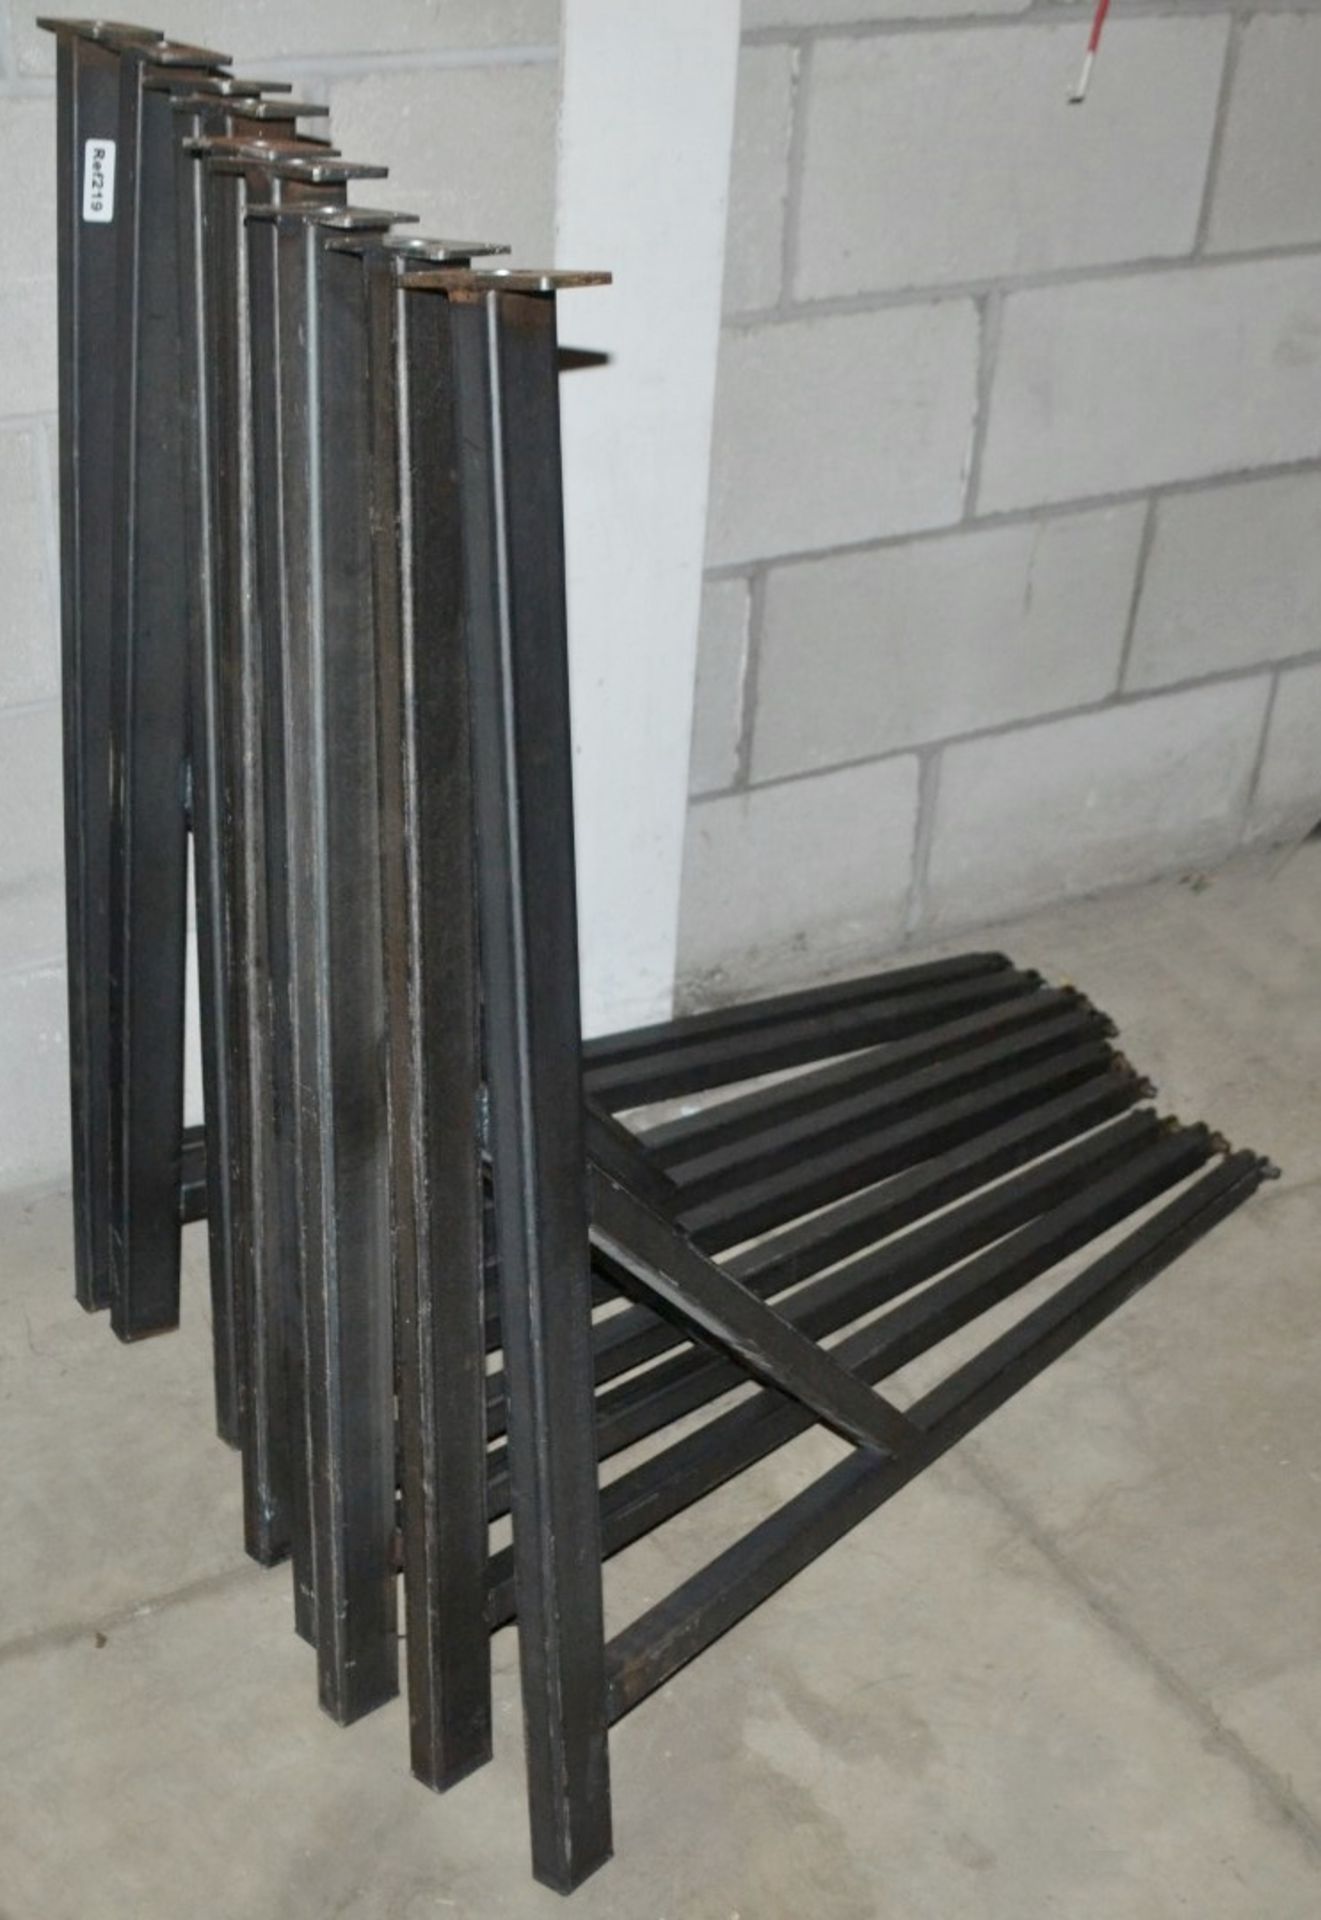 9 x Bespoke Industrial-style L-Shaped Wrought Iron Lighting Fixtures - Dimensions: 98 x 98cm - Image 2 of 3